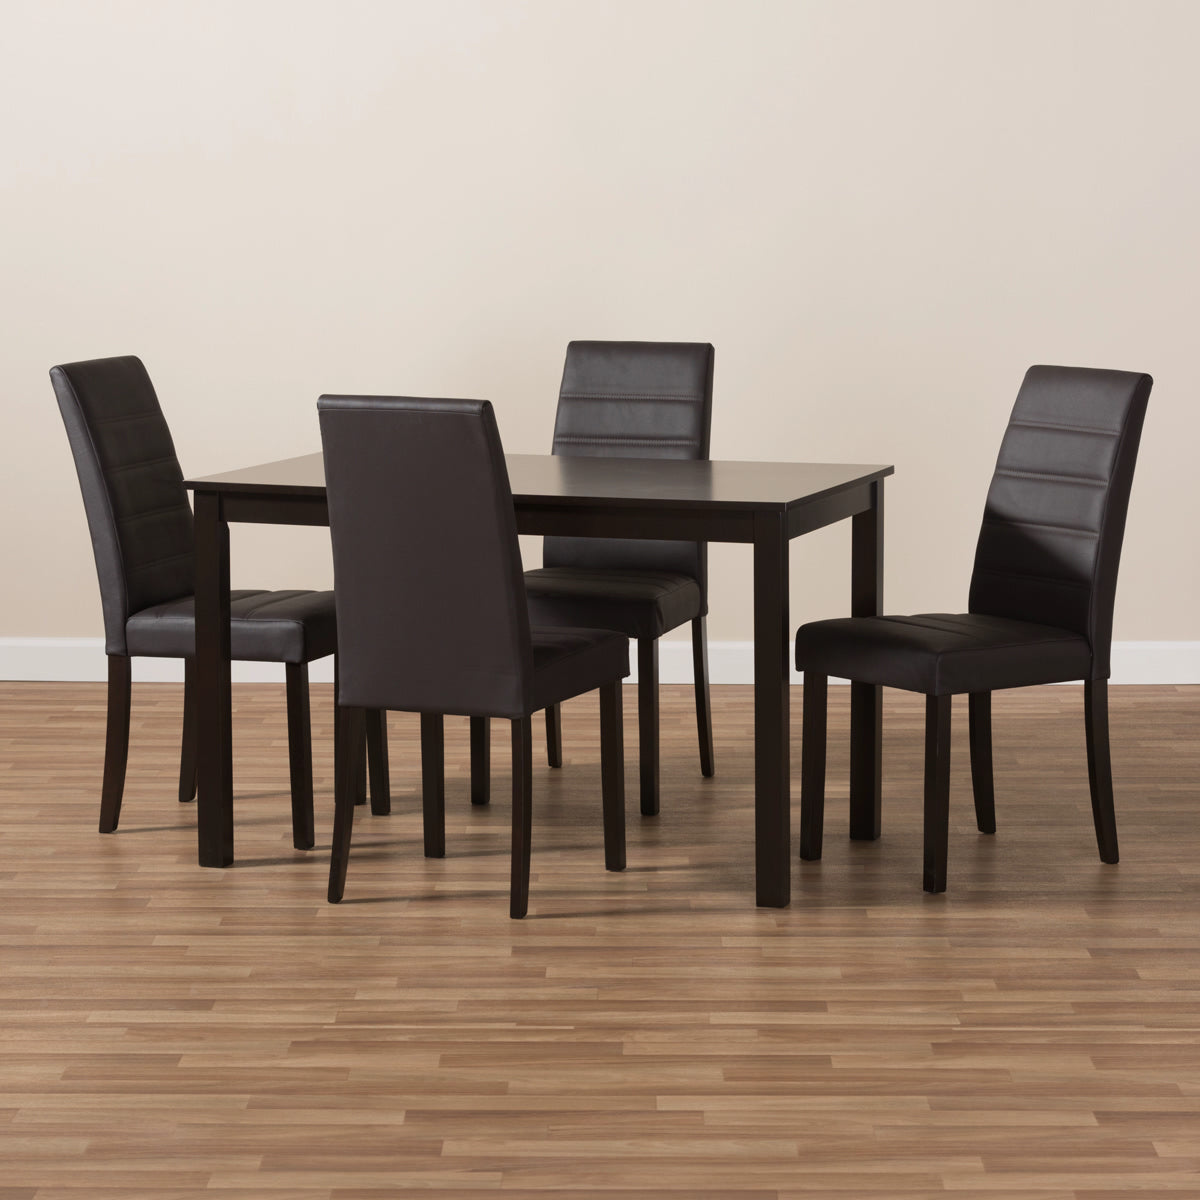 Baxton Studio Lorelle Modern and Contemporary Brown Faux Leather Upholstered 5-Piece Dining Set Baxton Studio-0-Minimal And Modern - 5